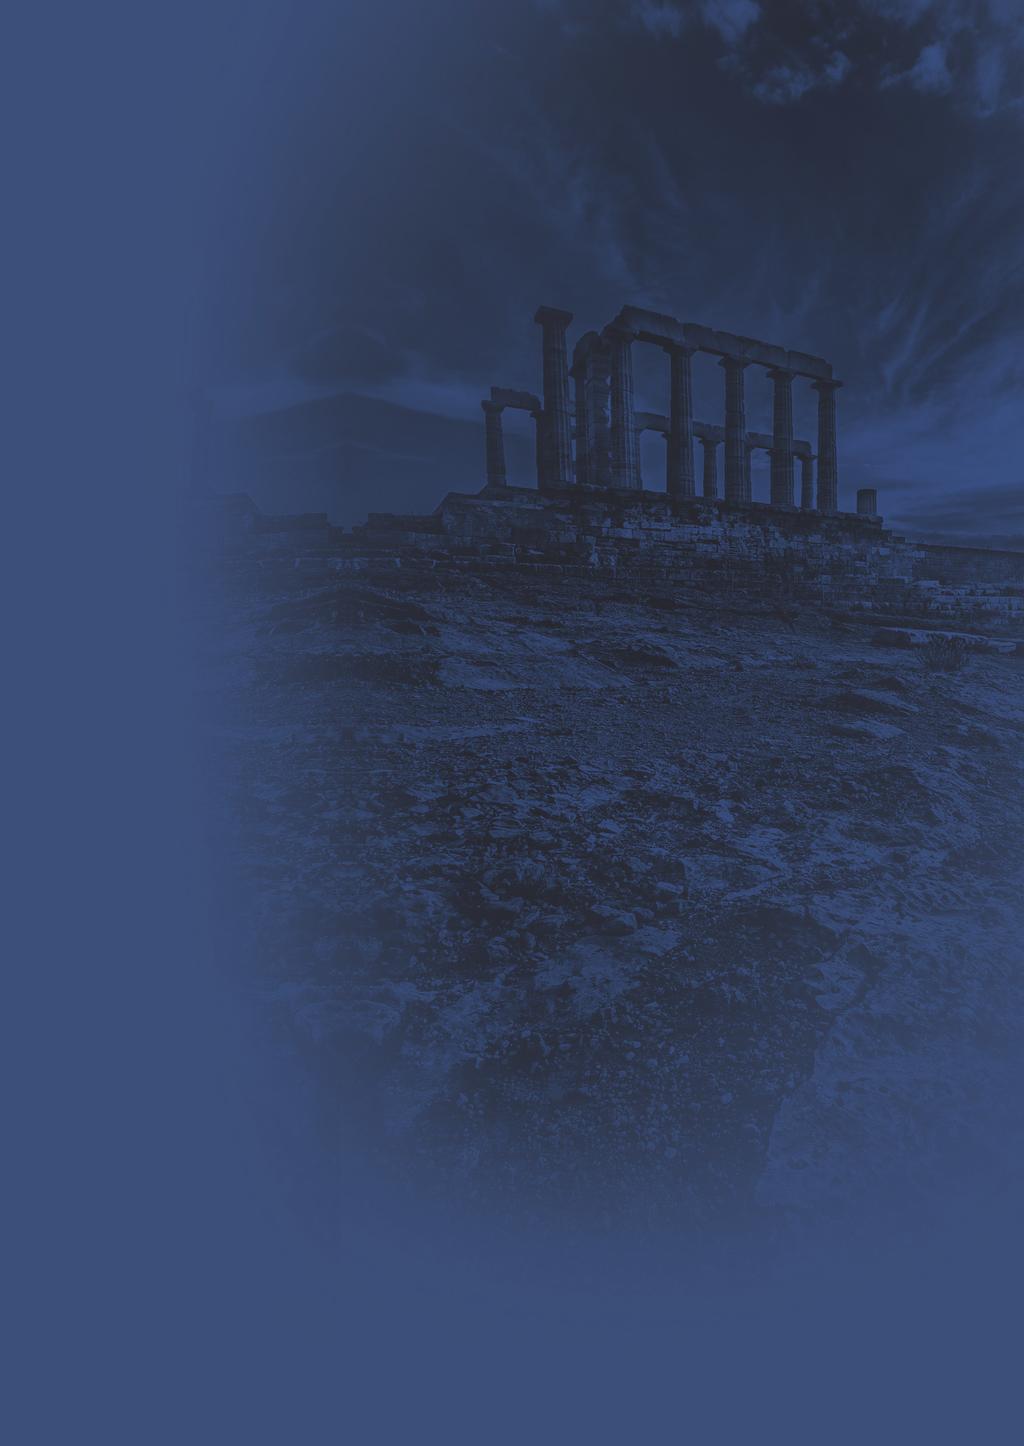 GENERAL INFORMATION VENUE AND DATES The Satellite Meeting Diabetes, will take place in Sounio, on June 15-16, 2017 at the EPLO (European Public Law Organization) (Address: 64th Km Sounion Ave.